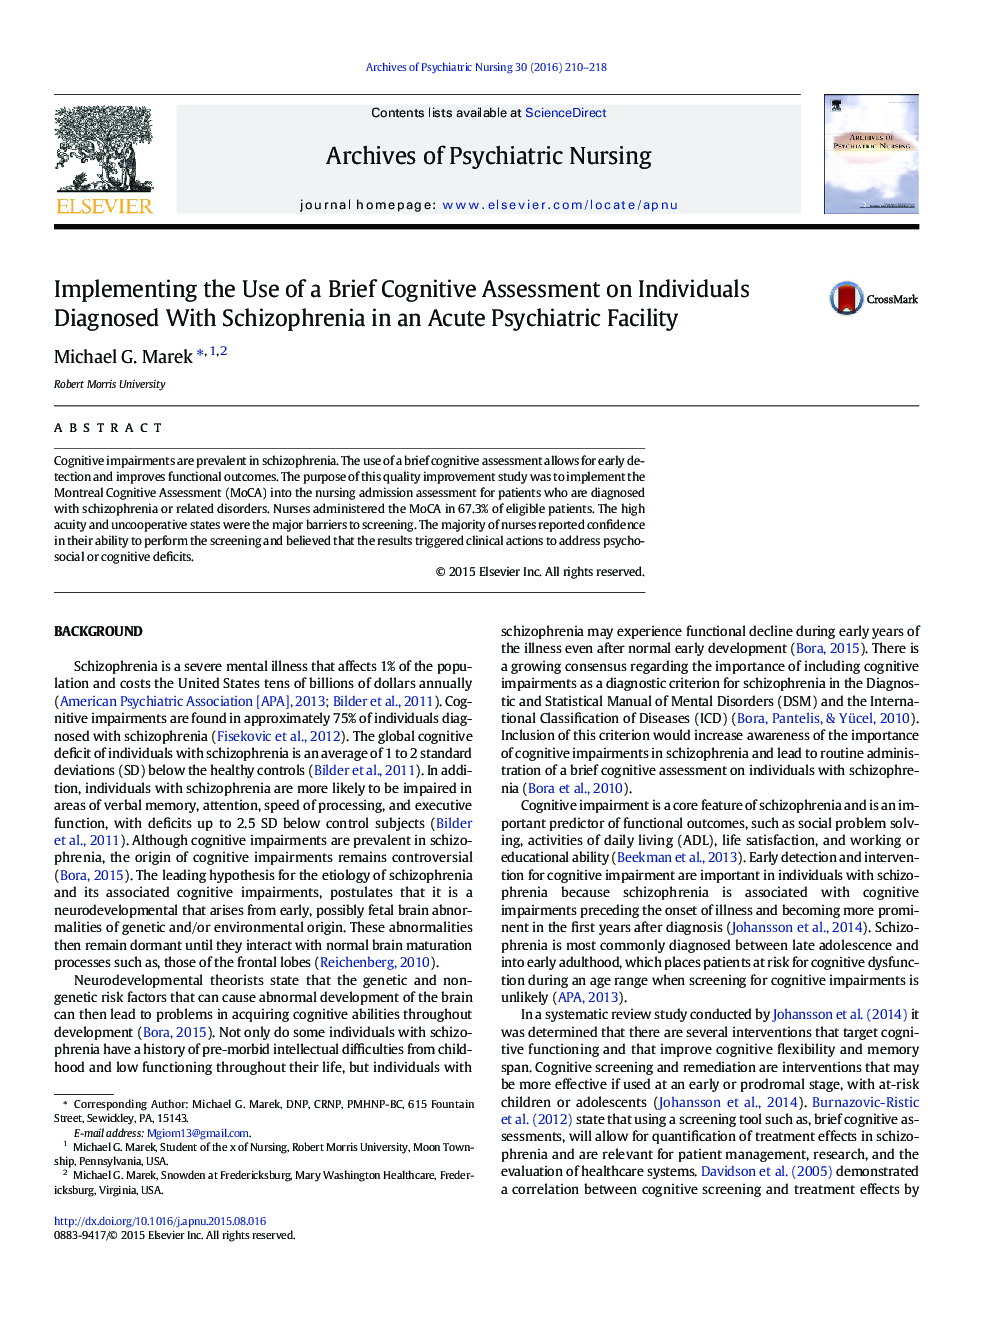 Implementing the Use of a Brief Cognitive Assessment on Individuals Diagnosed With Schizophrenia in an Acute Psychiatric Facility